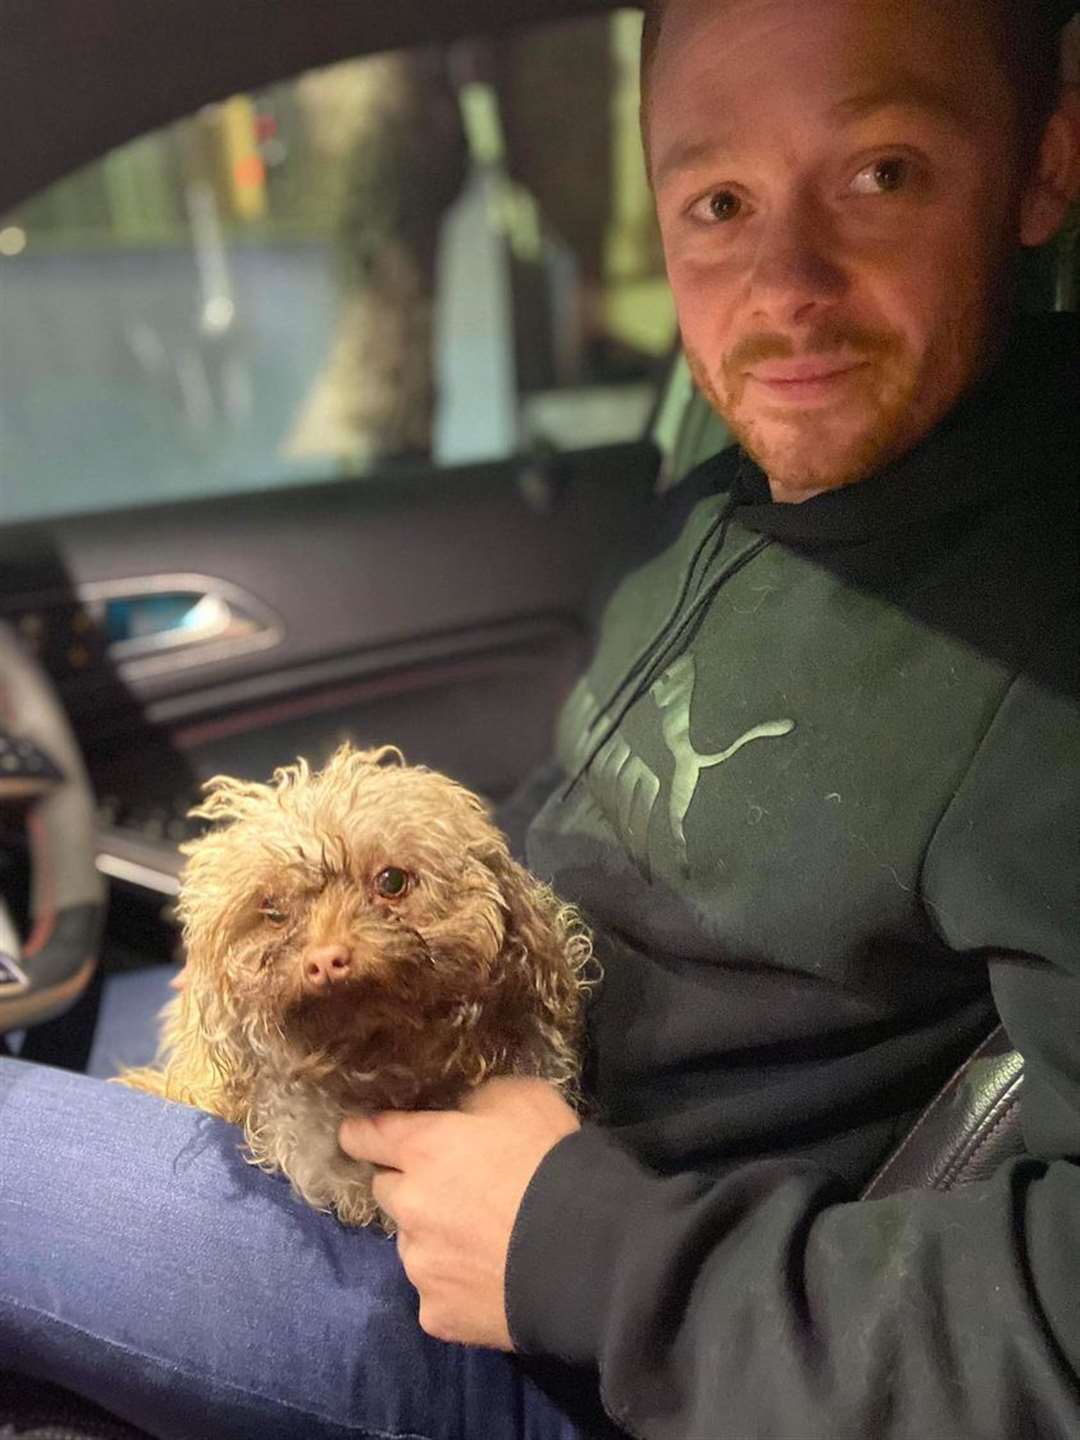 Bjorn was reunited with his owners